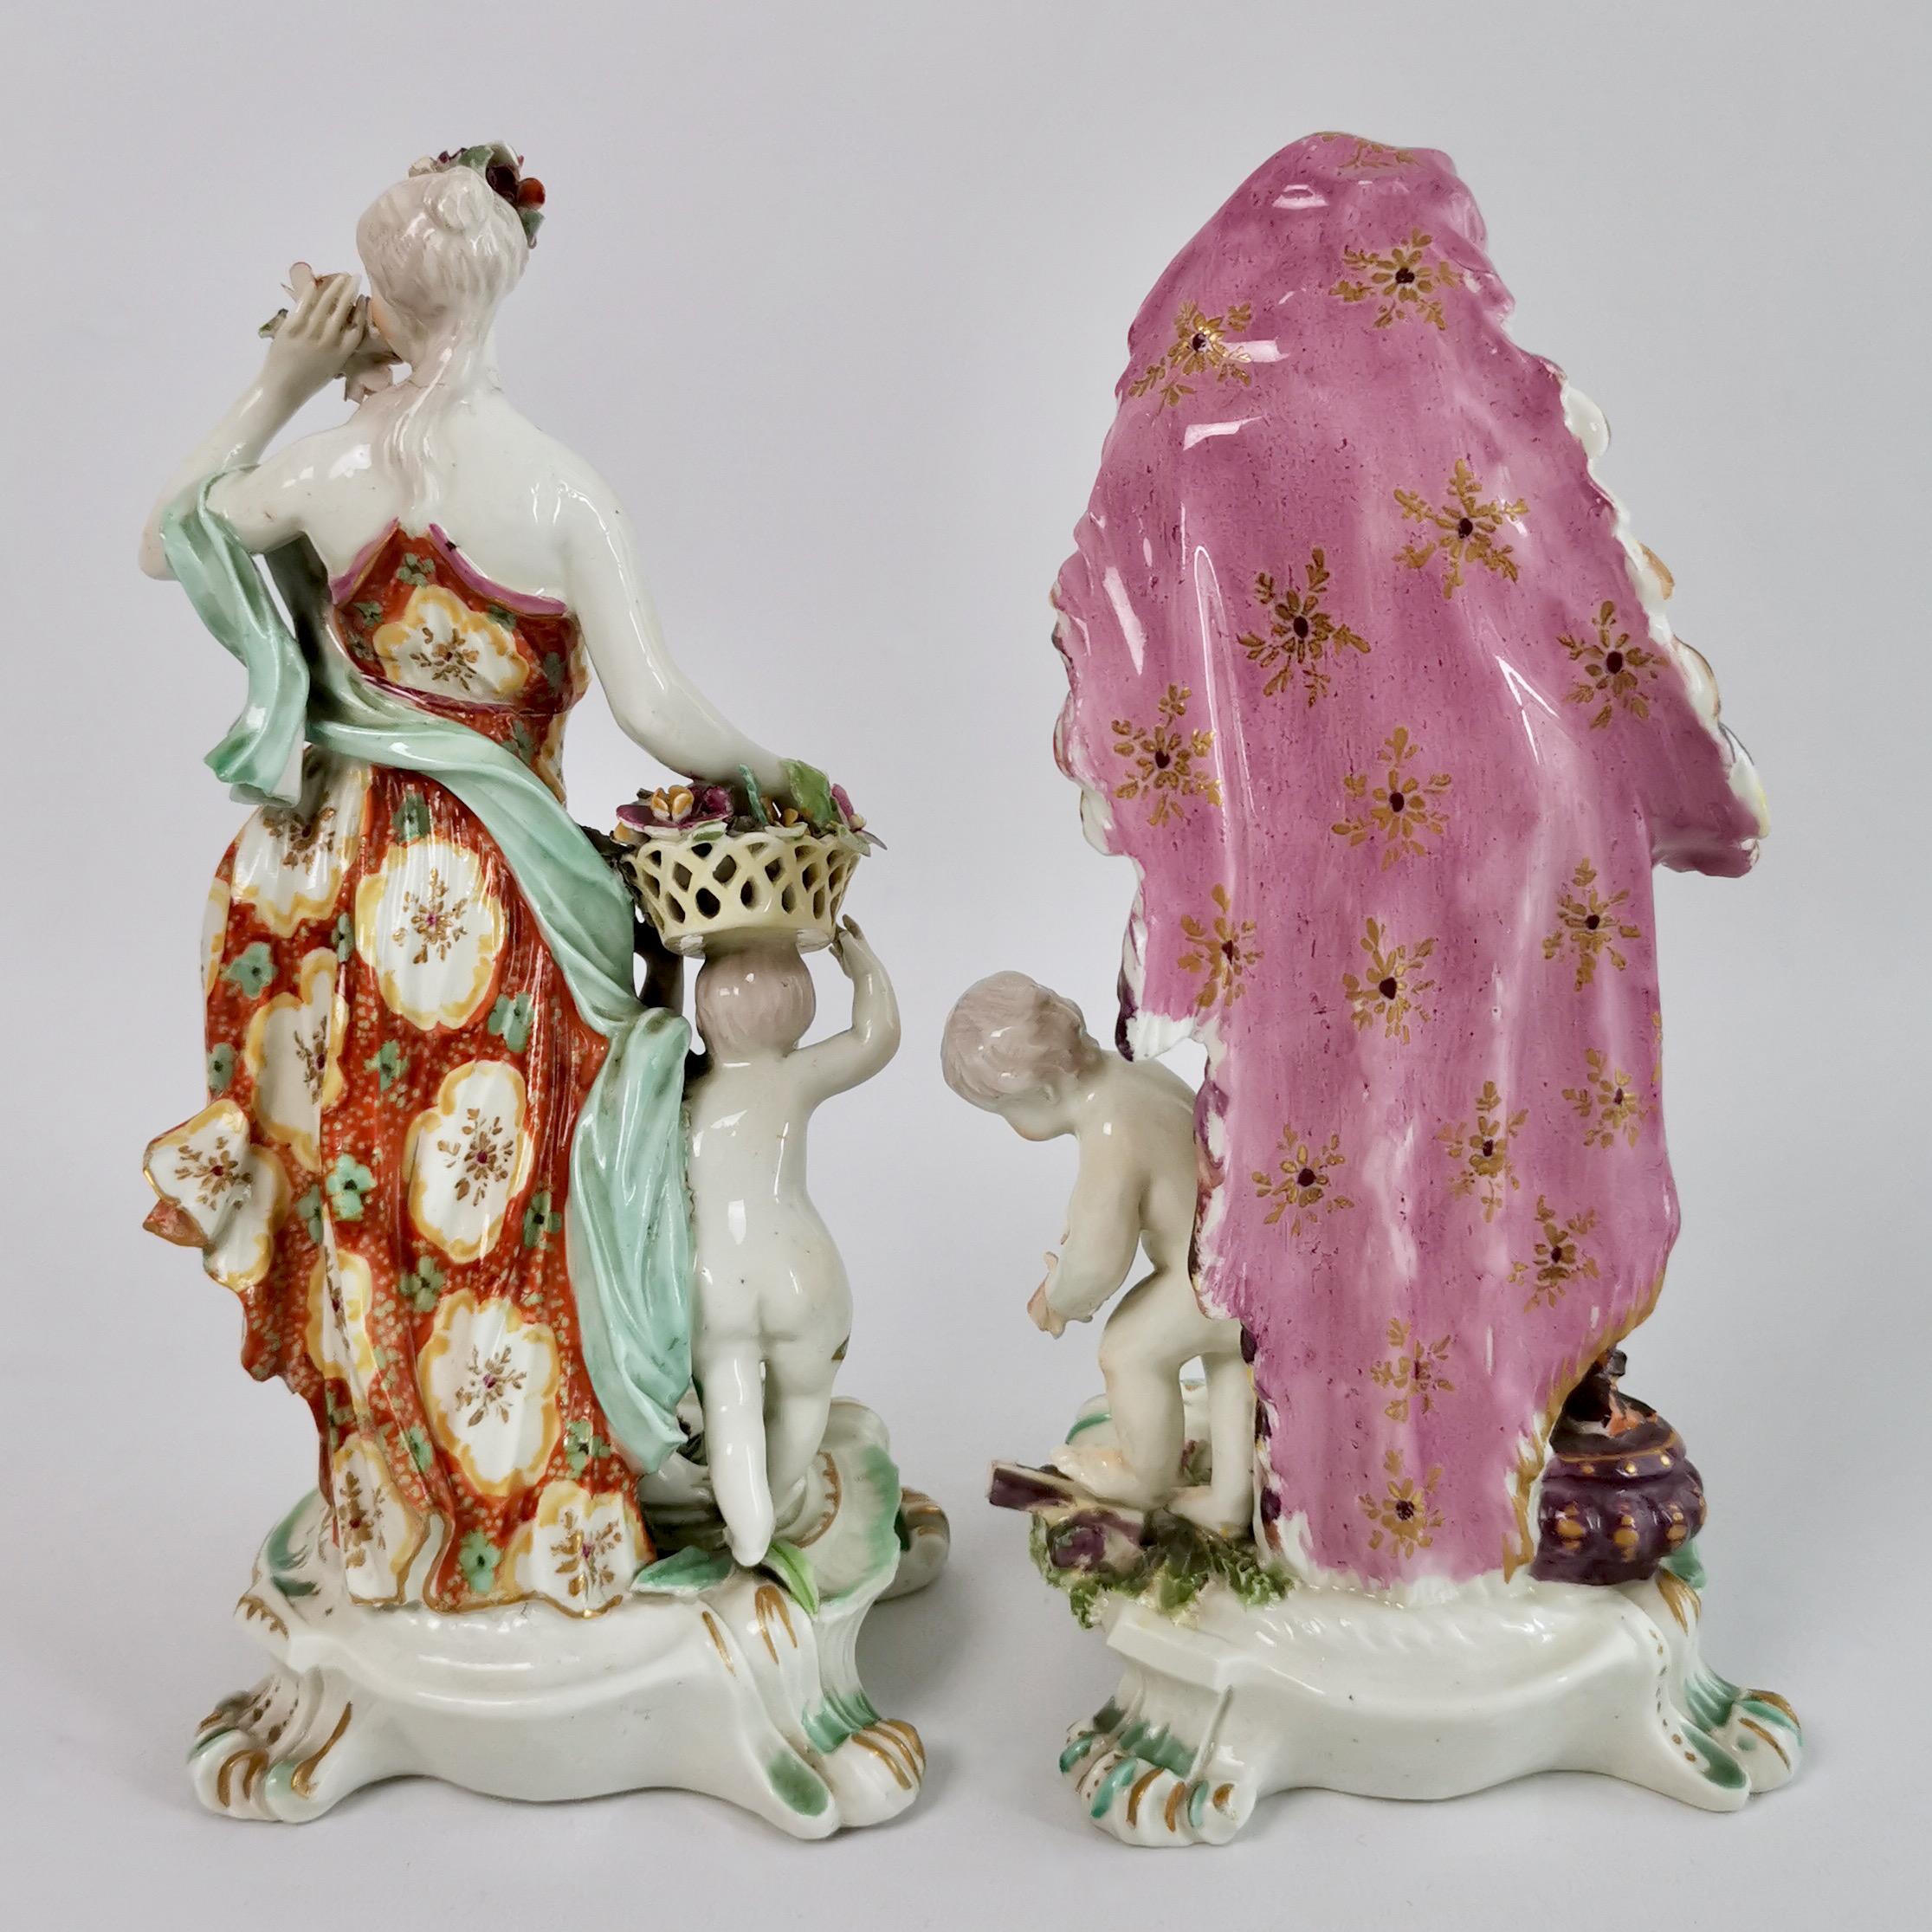 Hand-Painted Derby Pair of Porcelain Figures of Winter and Spring, Rococo Period 1756-1759